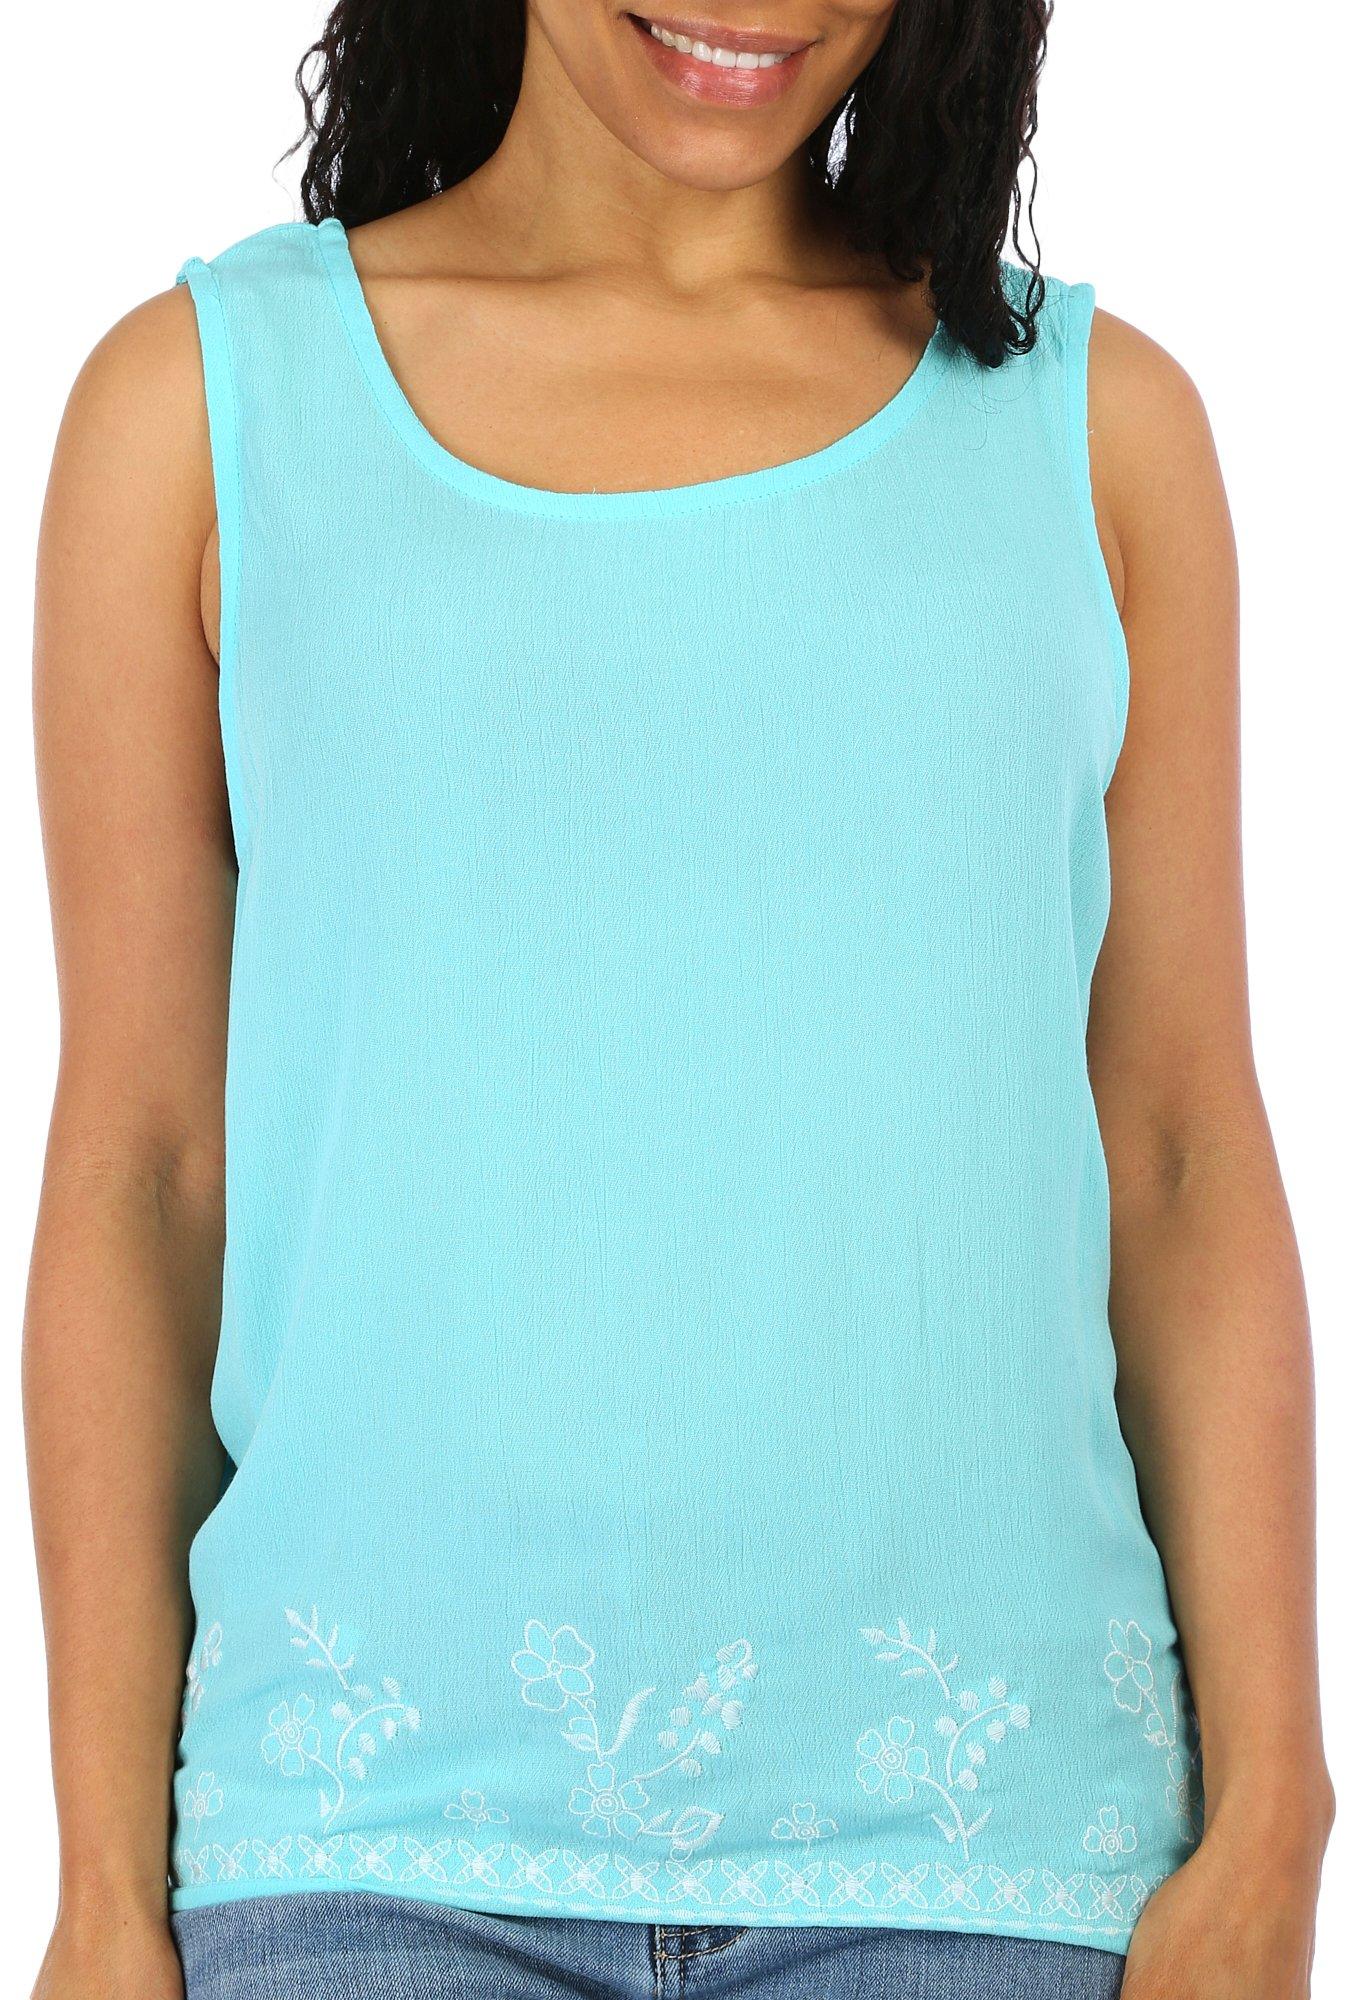 Juniper + Lime Petite Embroidered Sleeveless Top